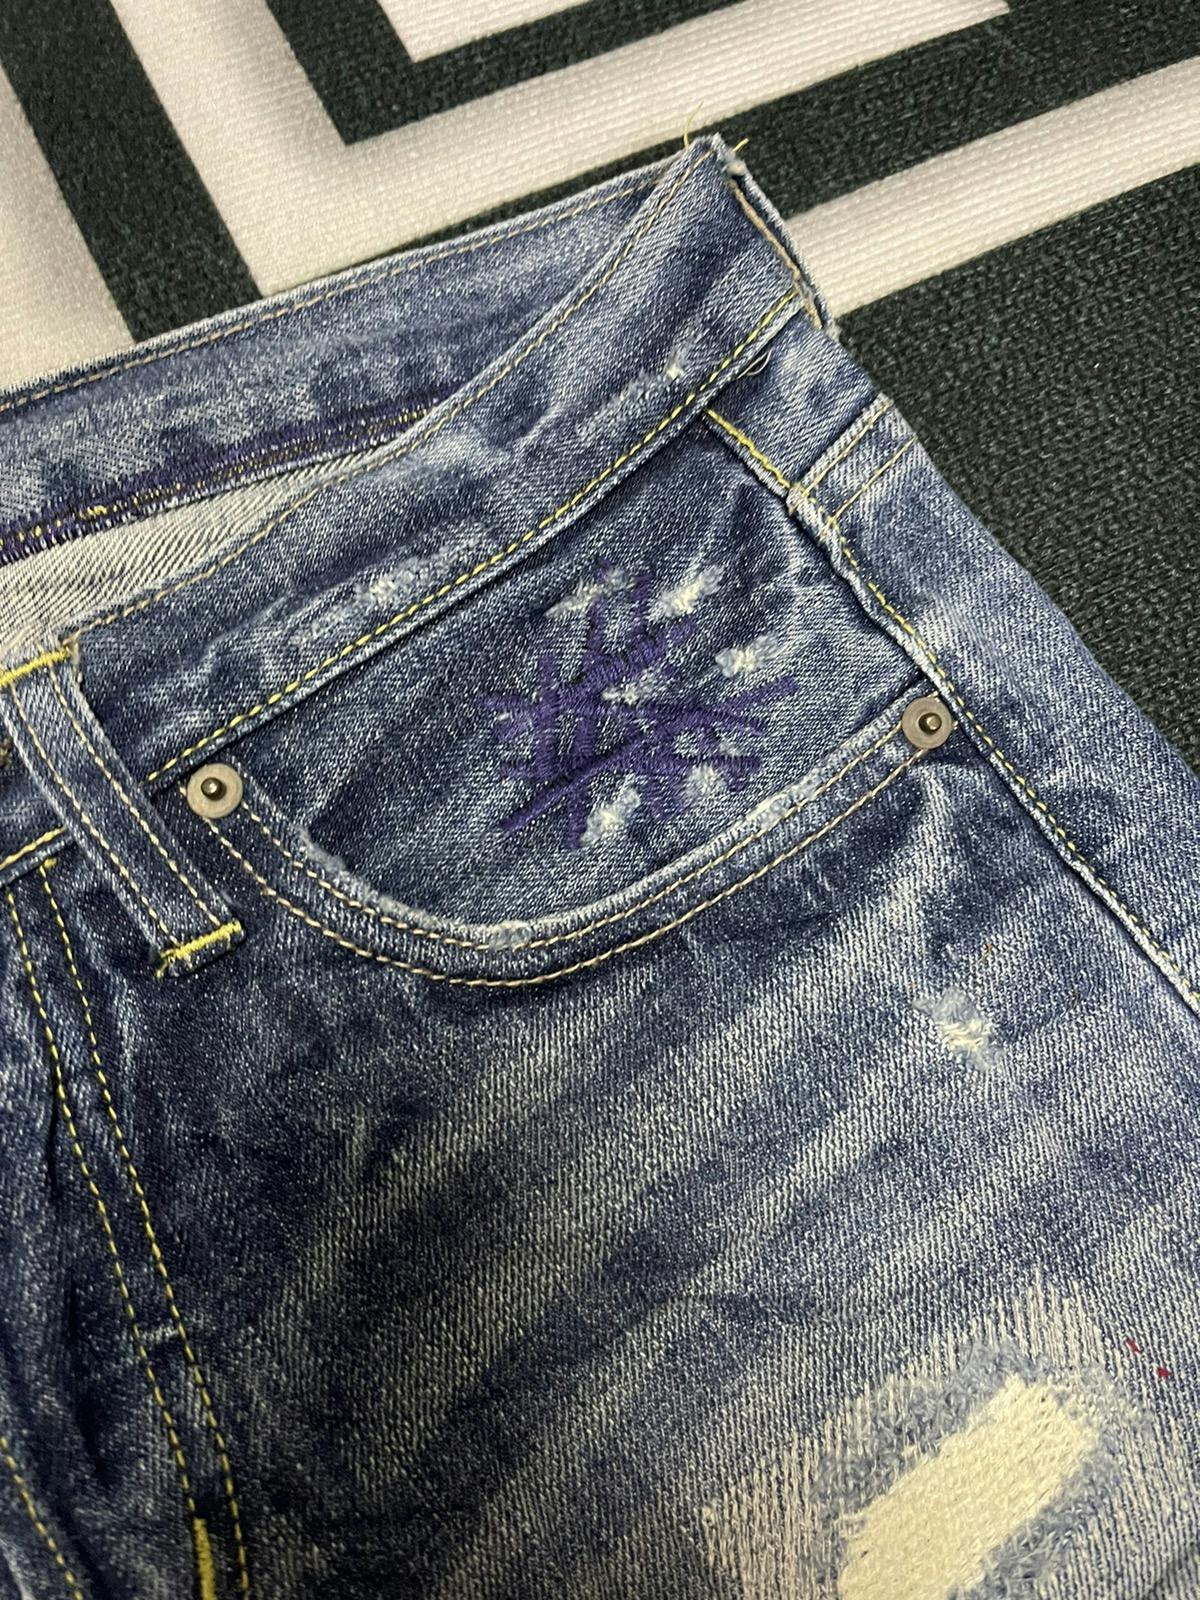 Andy warhol x hysteric glamour distressed jeans - 5